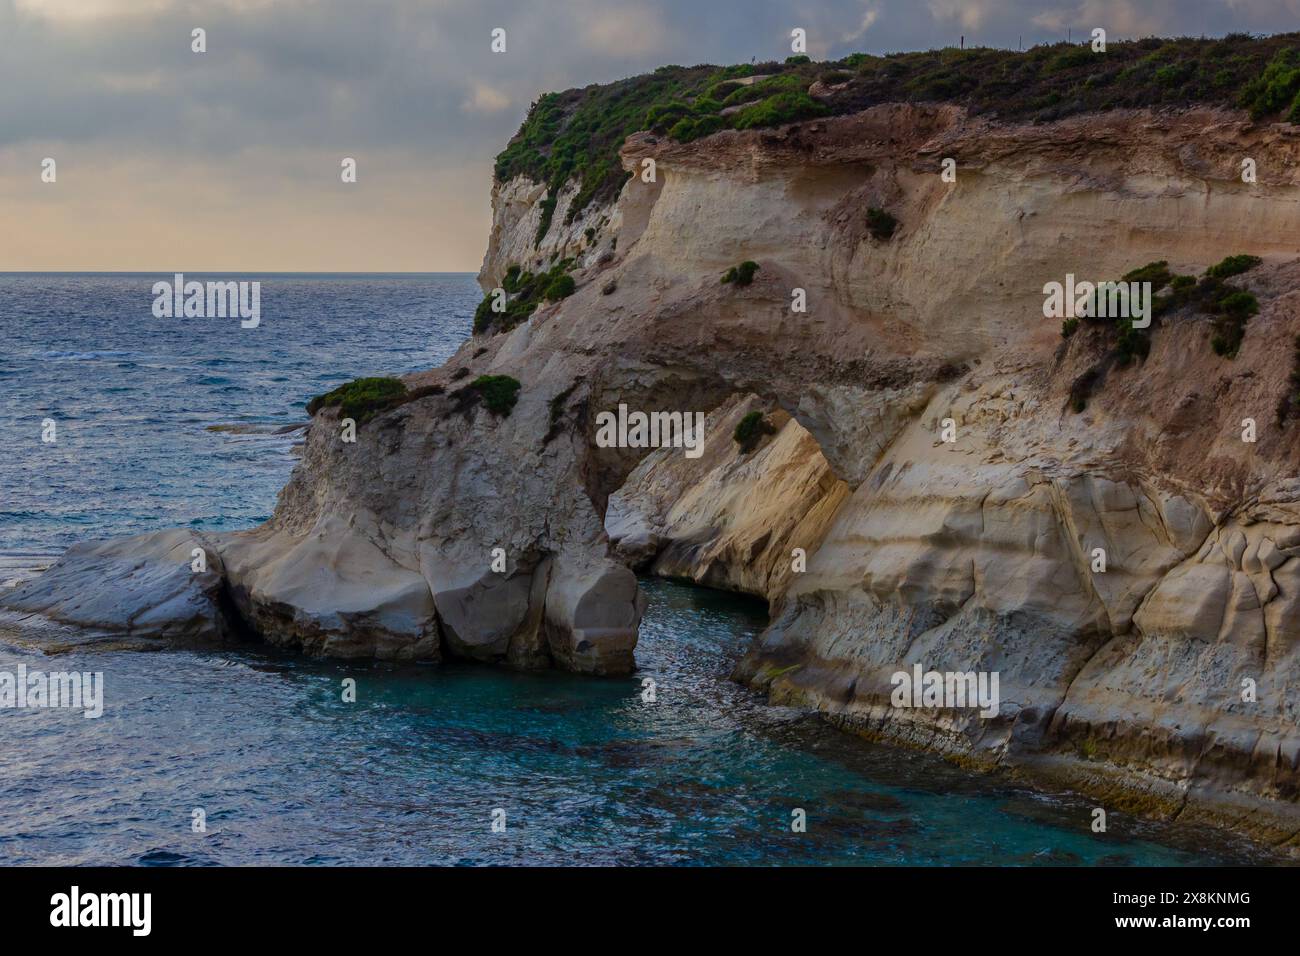 Tranquil coastline with stunning rock formations and crystal clear water. Stock Photo